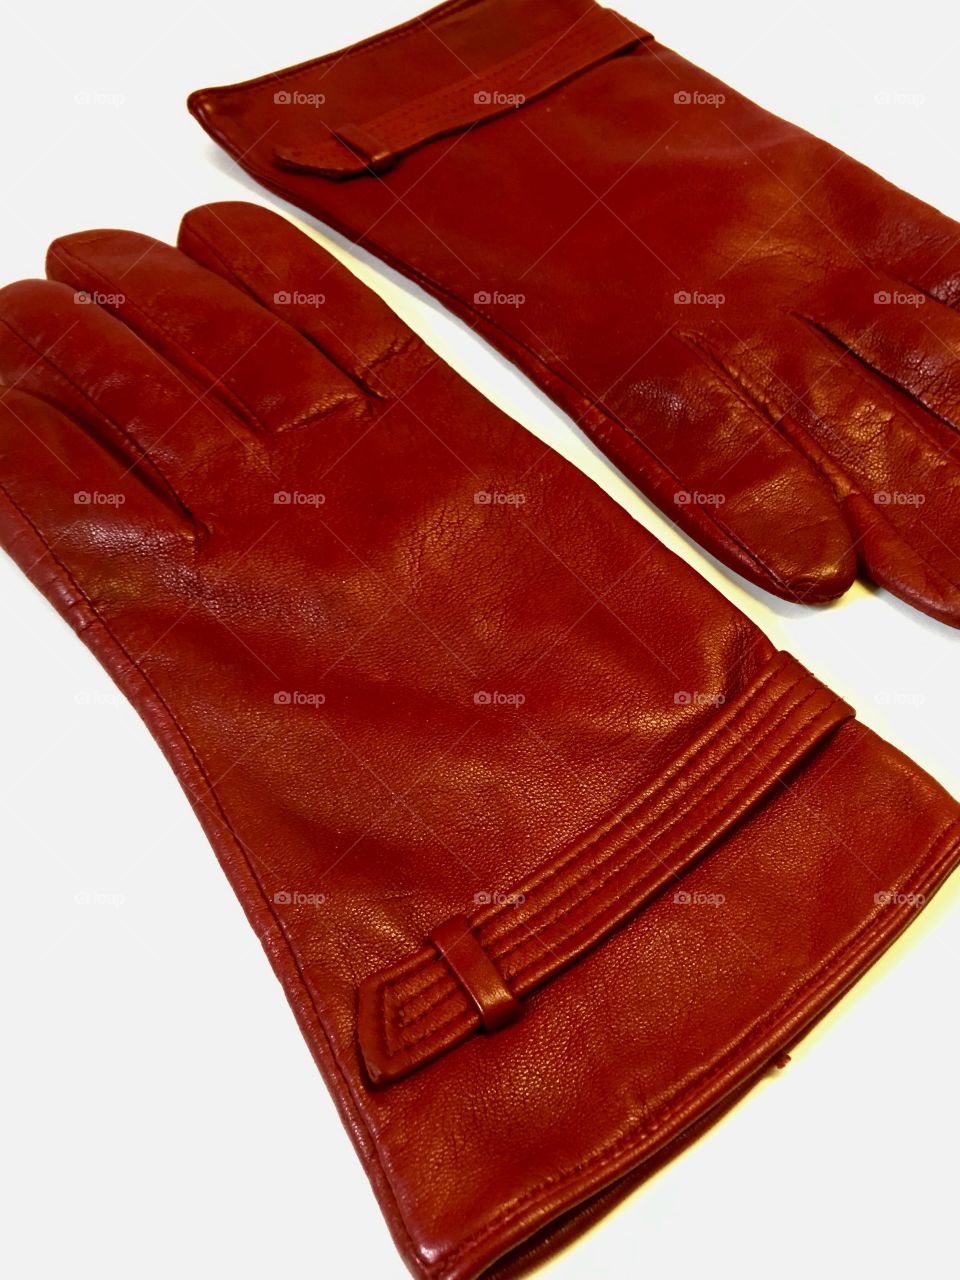 Red leather gloves